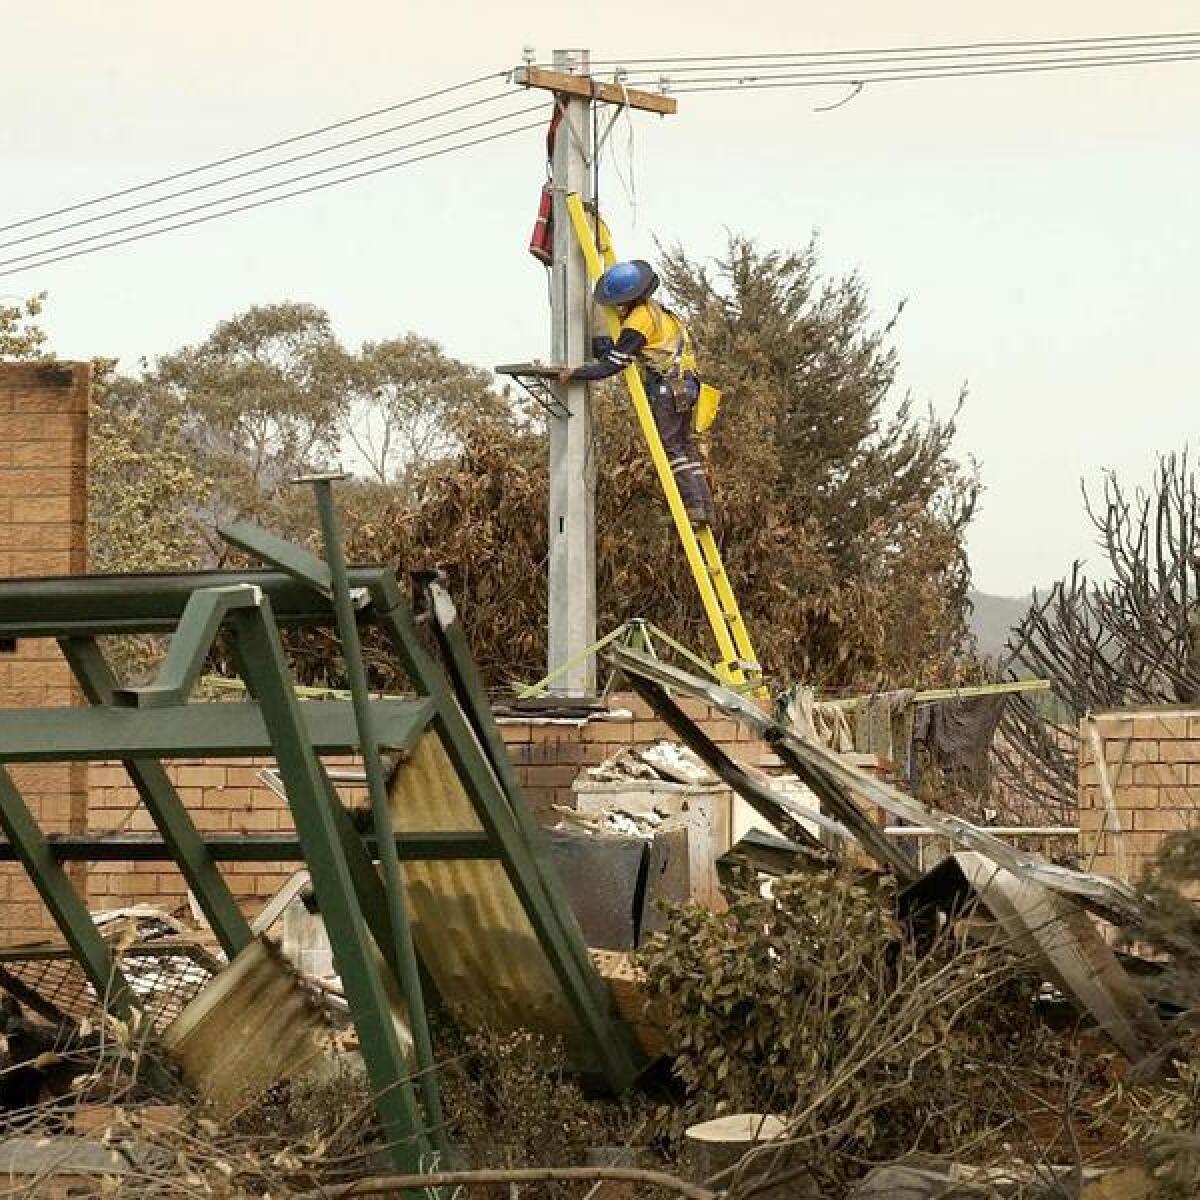 A worker repairs electricity lines following bushfires near Canberra.